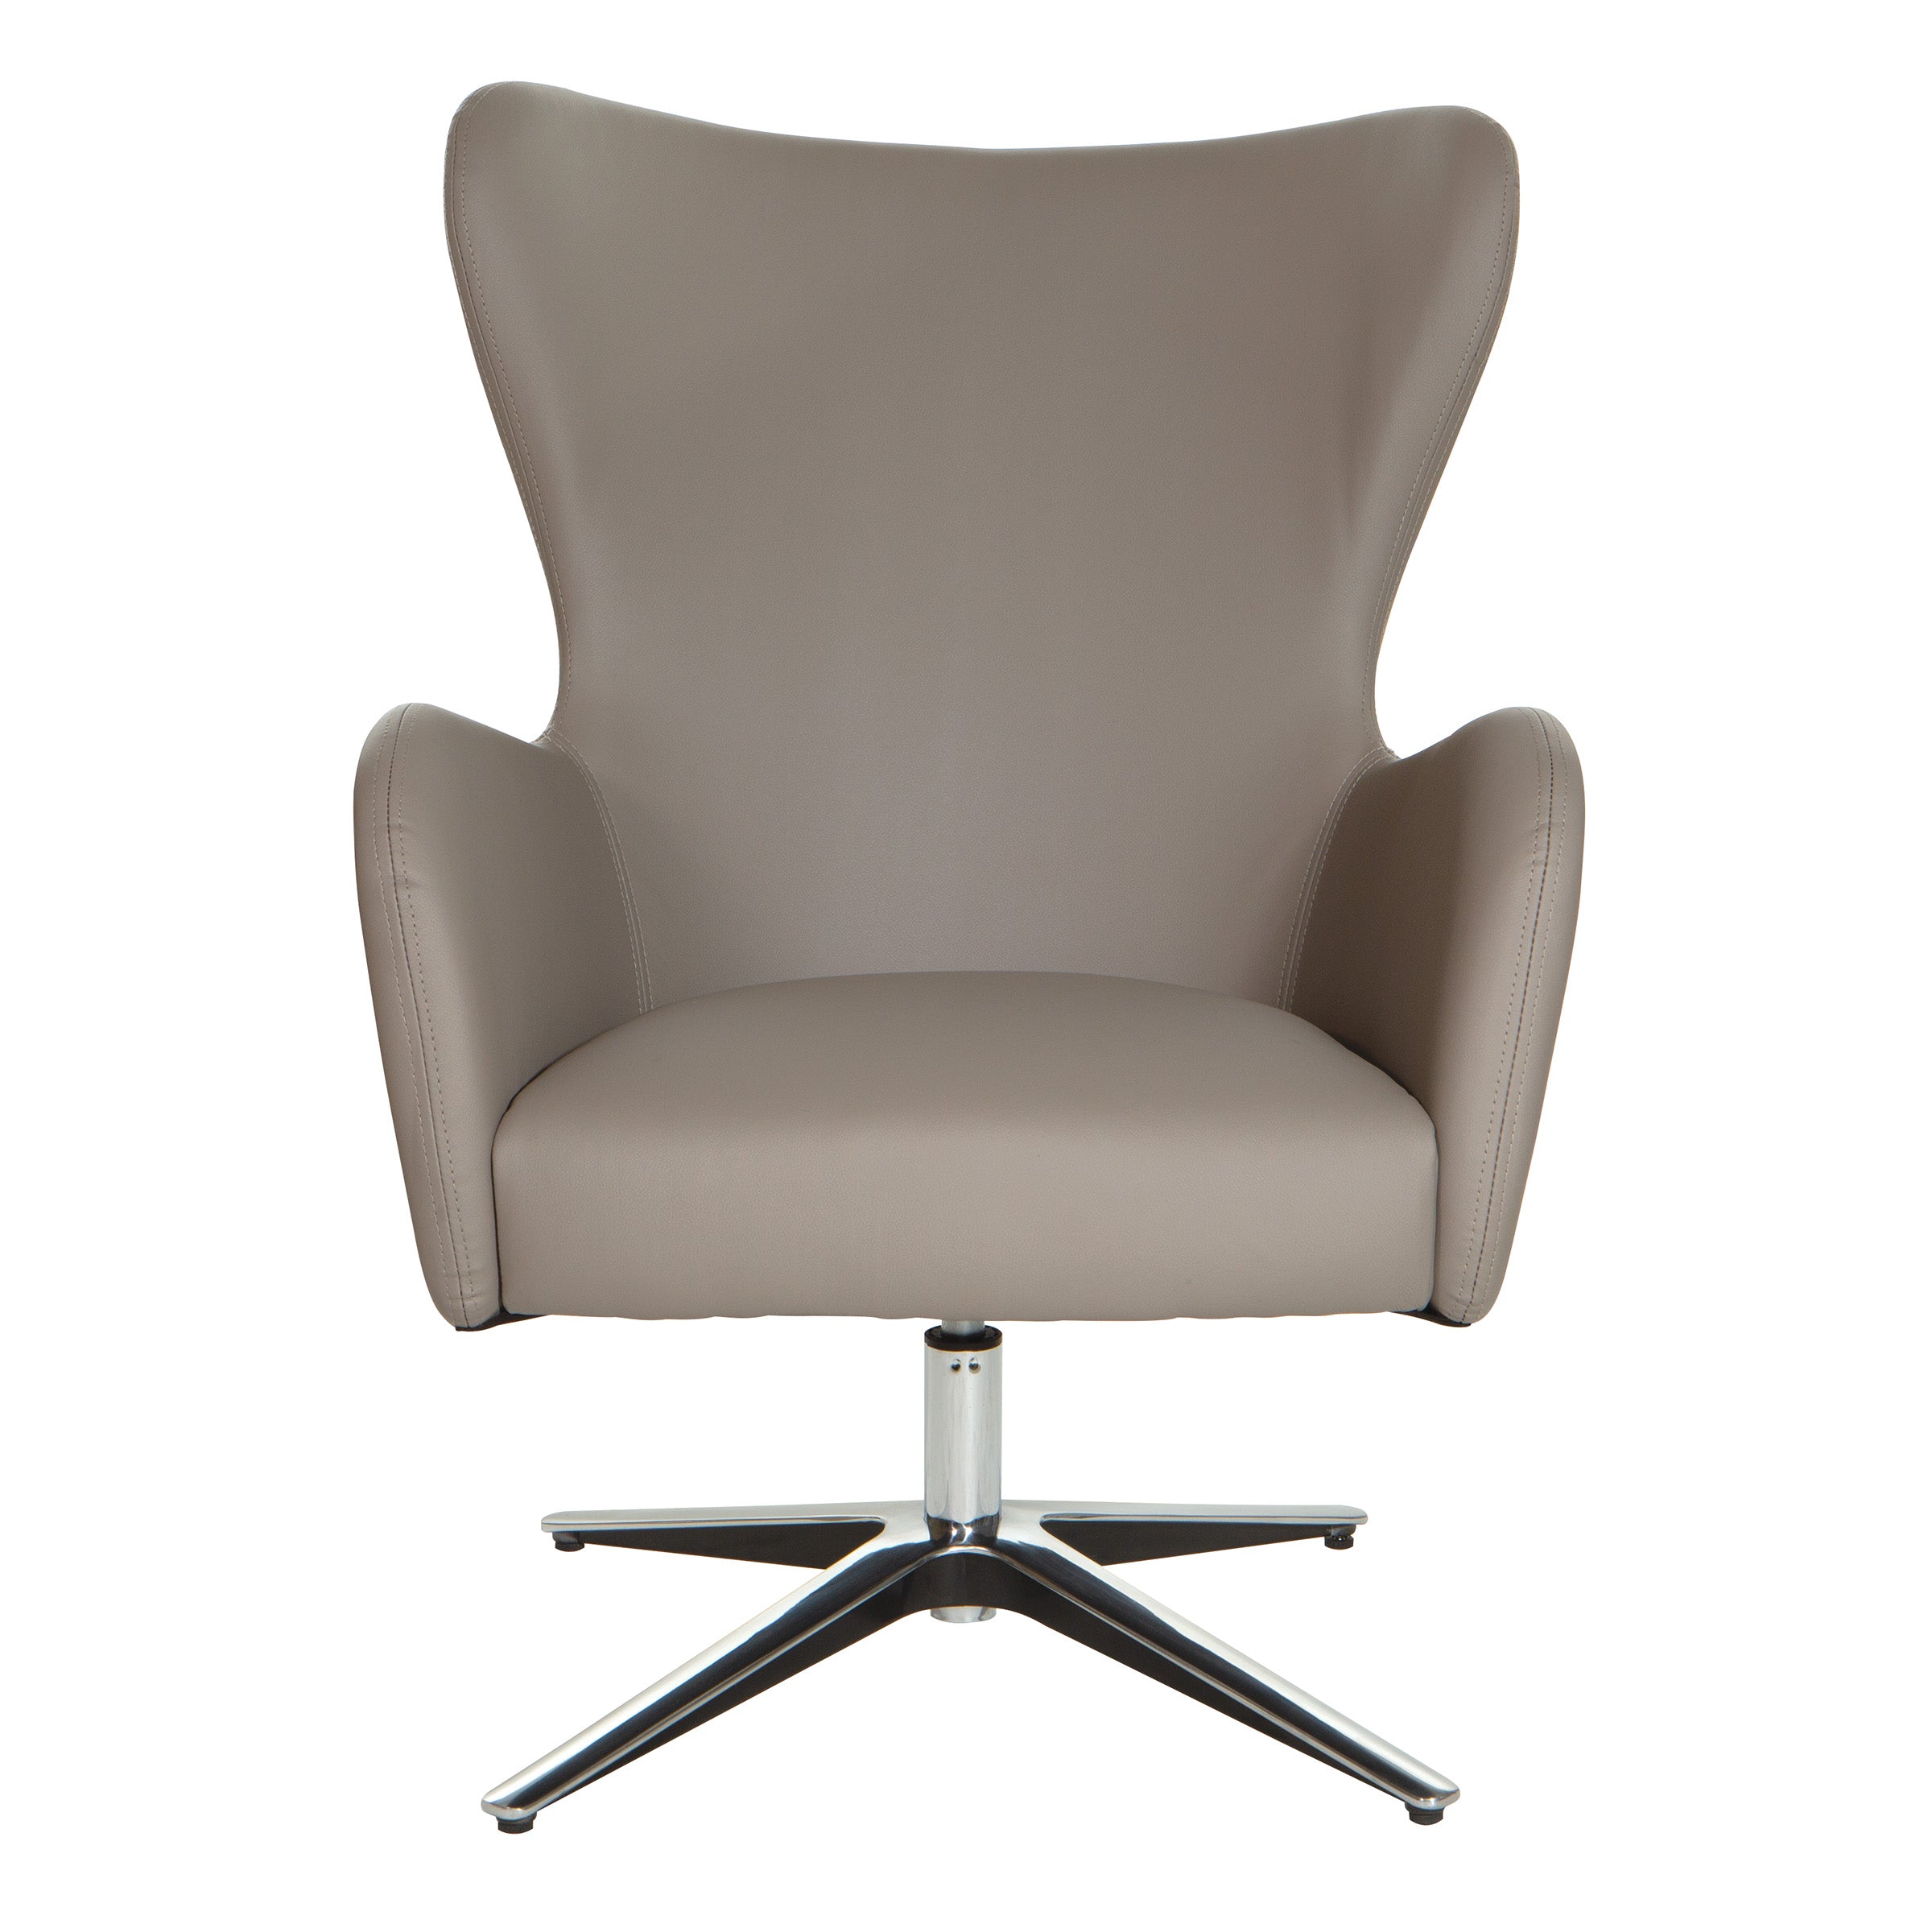 LS5387AL - Modern Oversized Swivel Lounge Chair with Aluminum Base by OSP